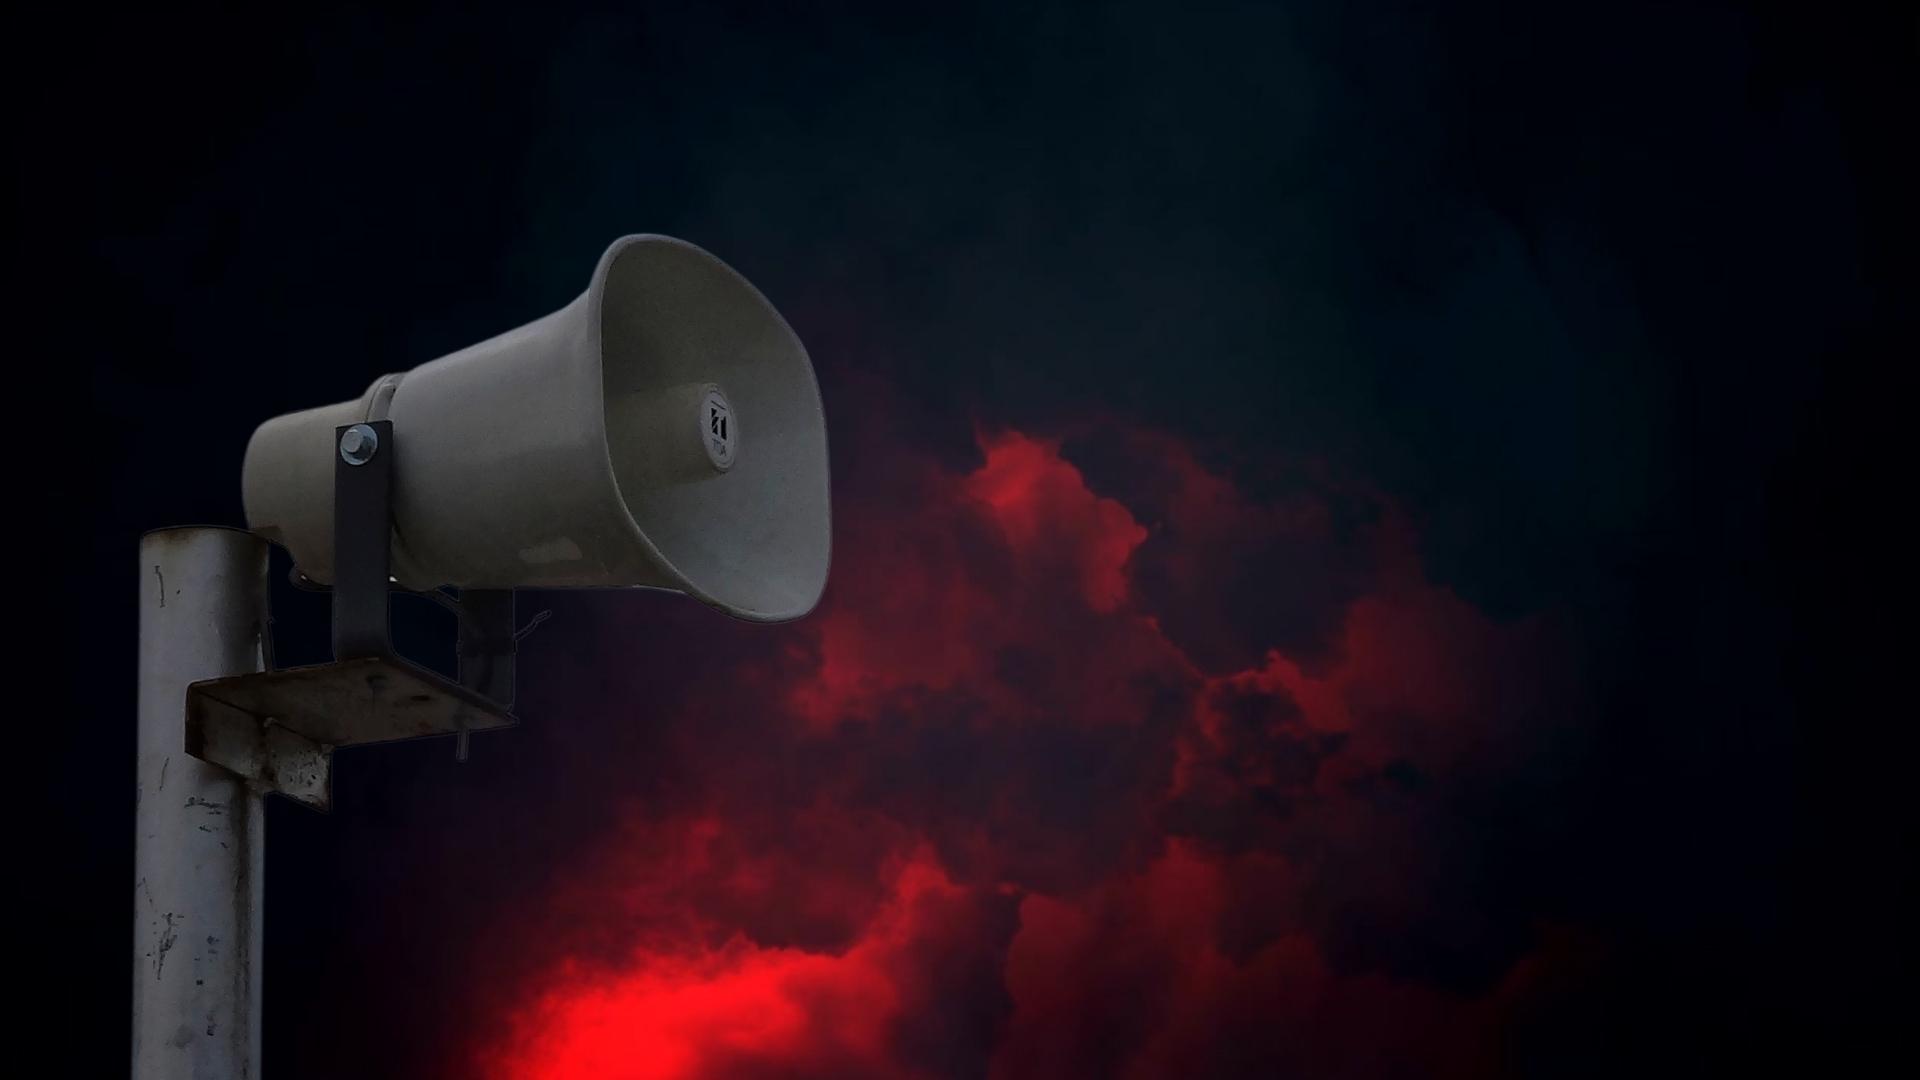 Emergency Warning Sirens Sound During Storm